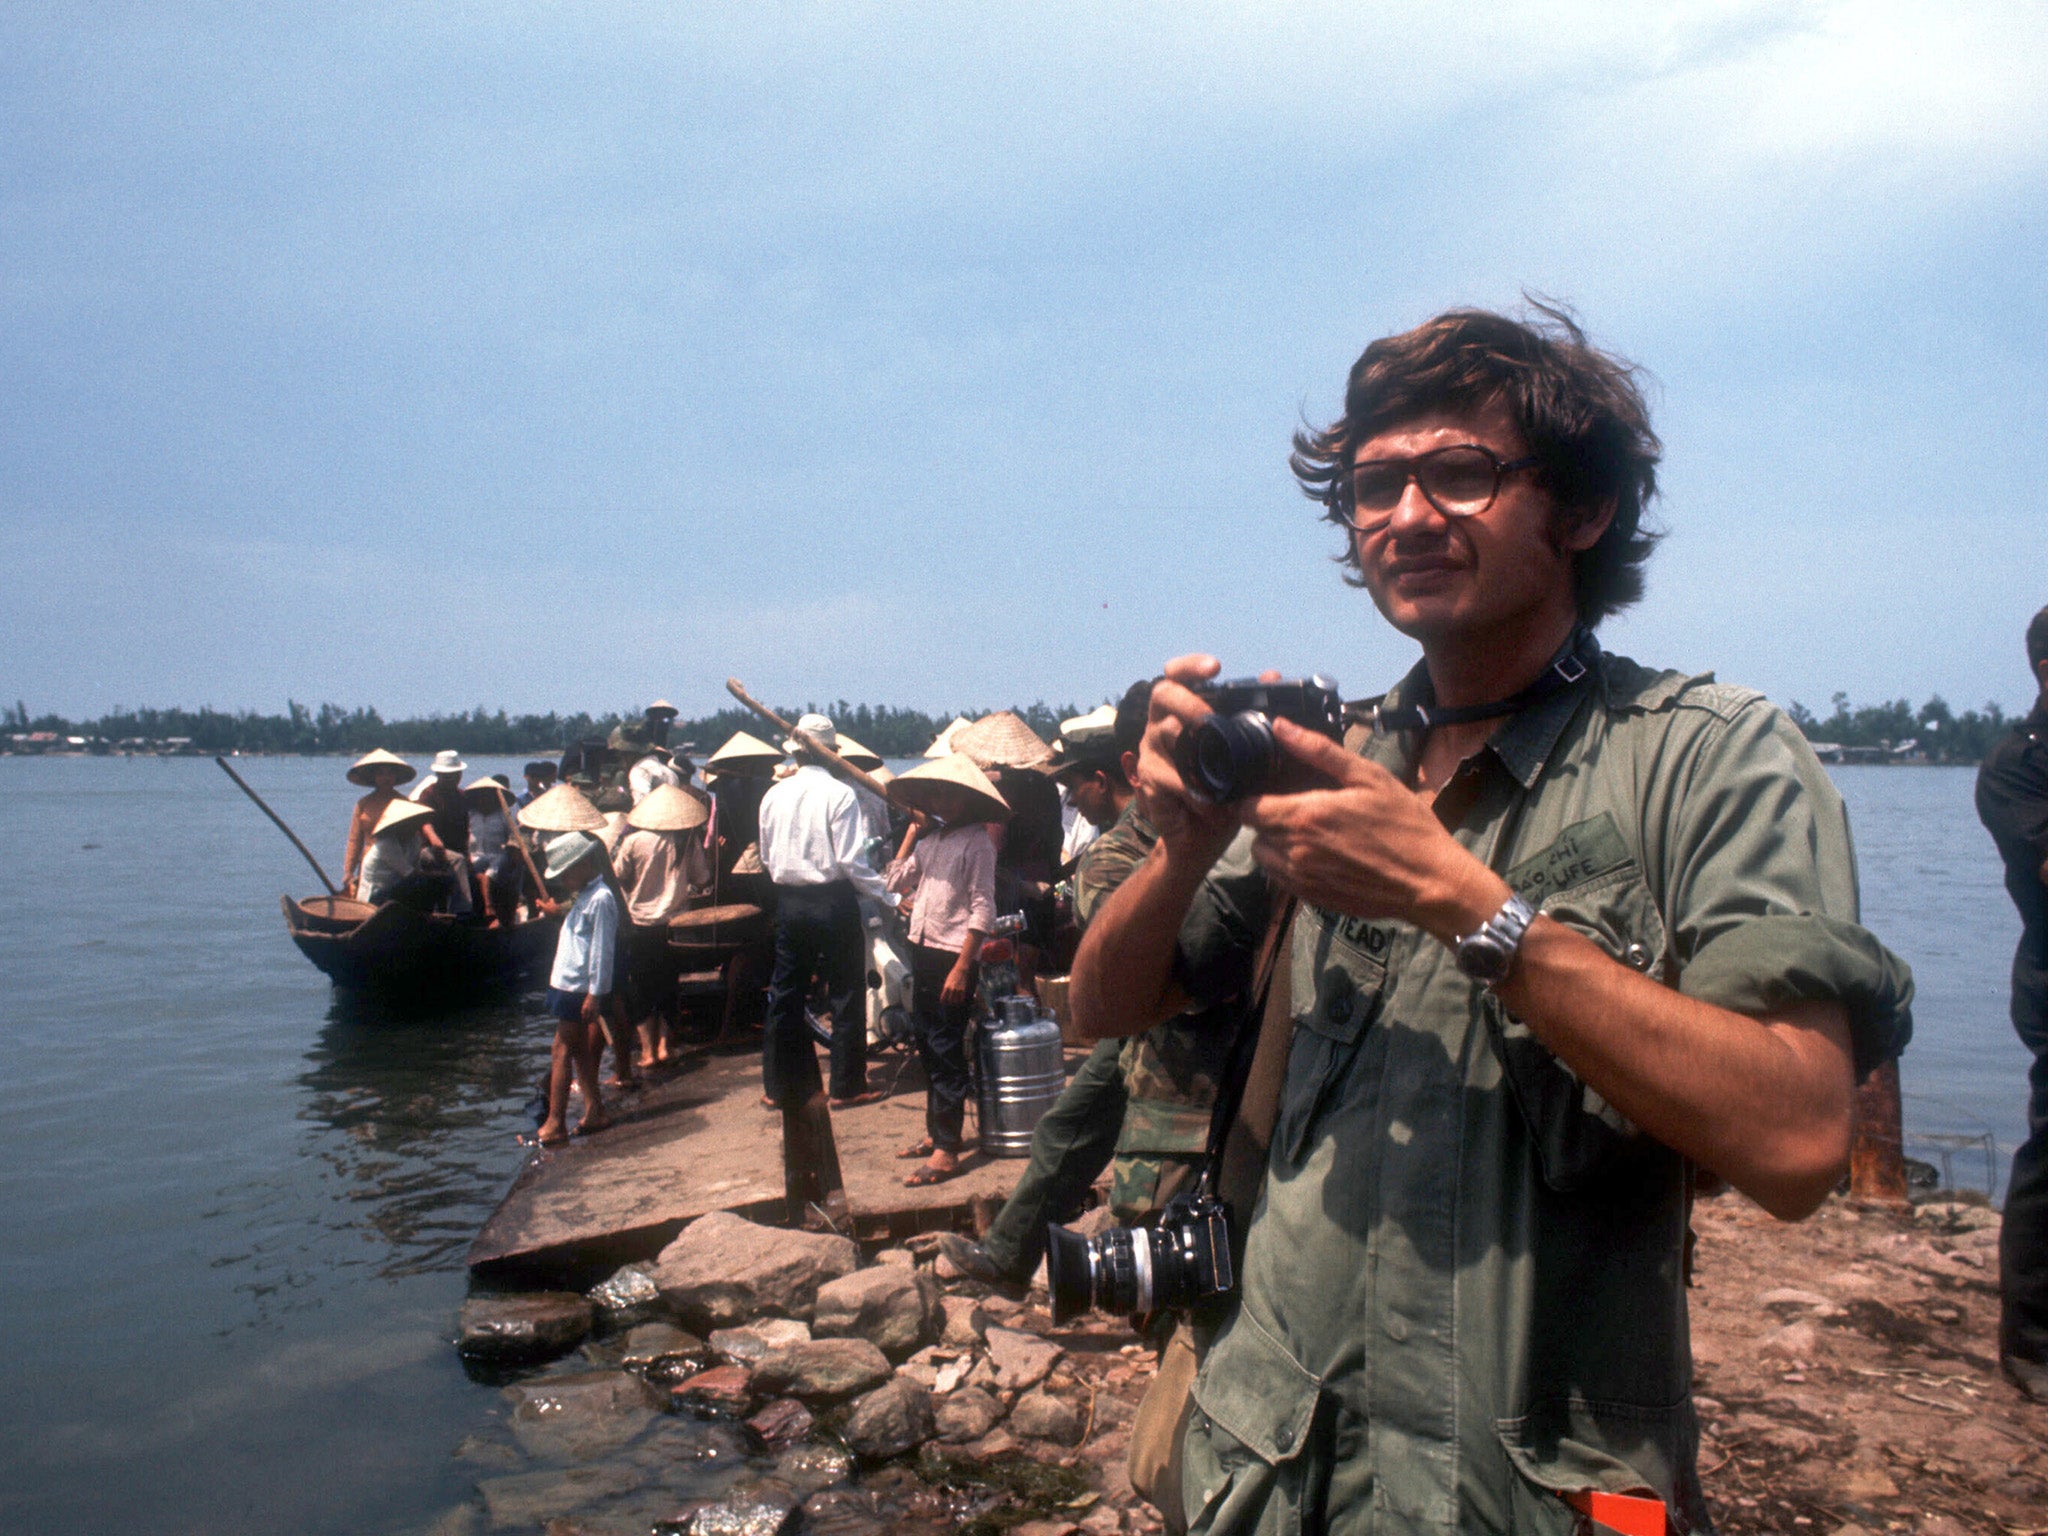 Dirck Halstead takes a picture in Hue, Vietnam, 22 May 1972